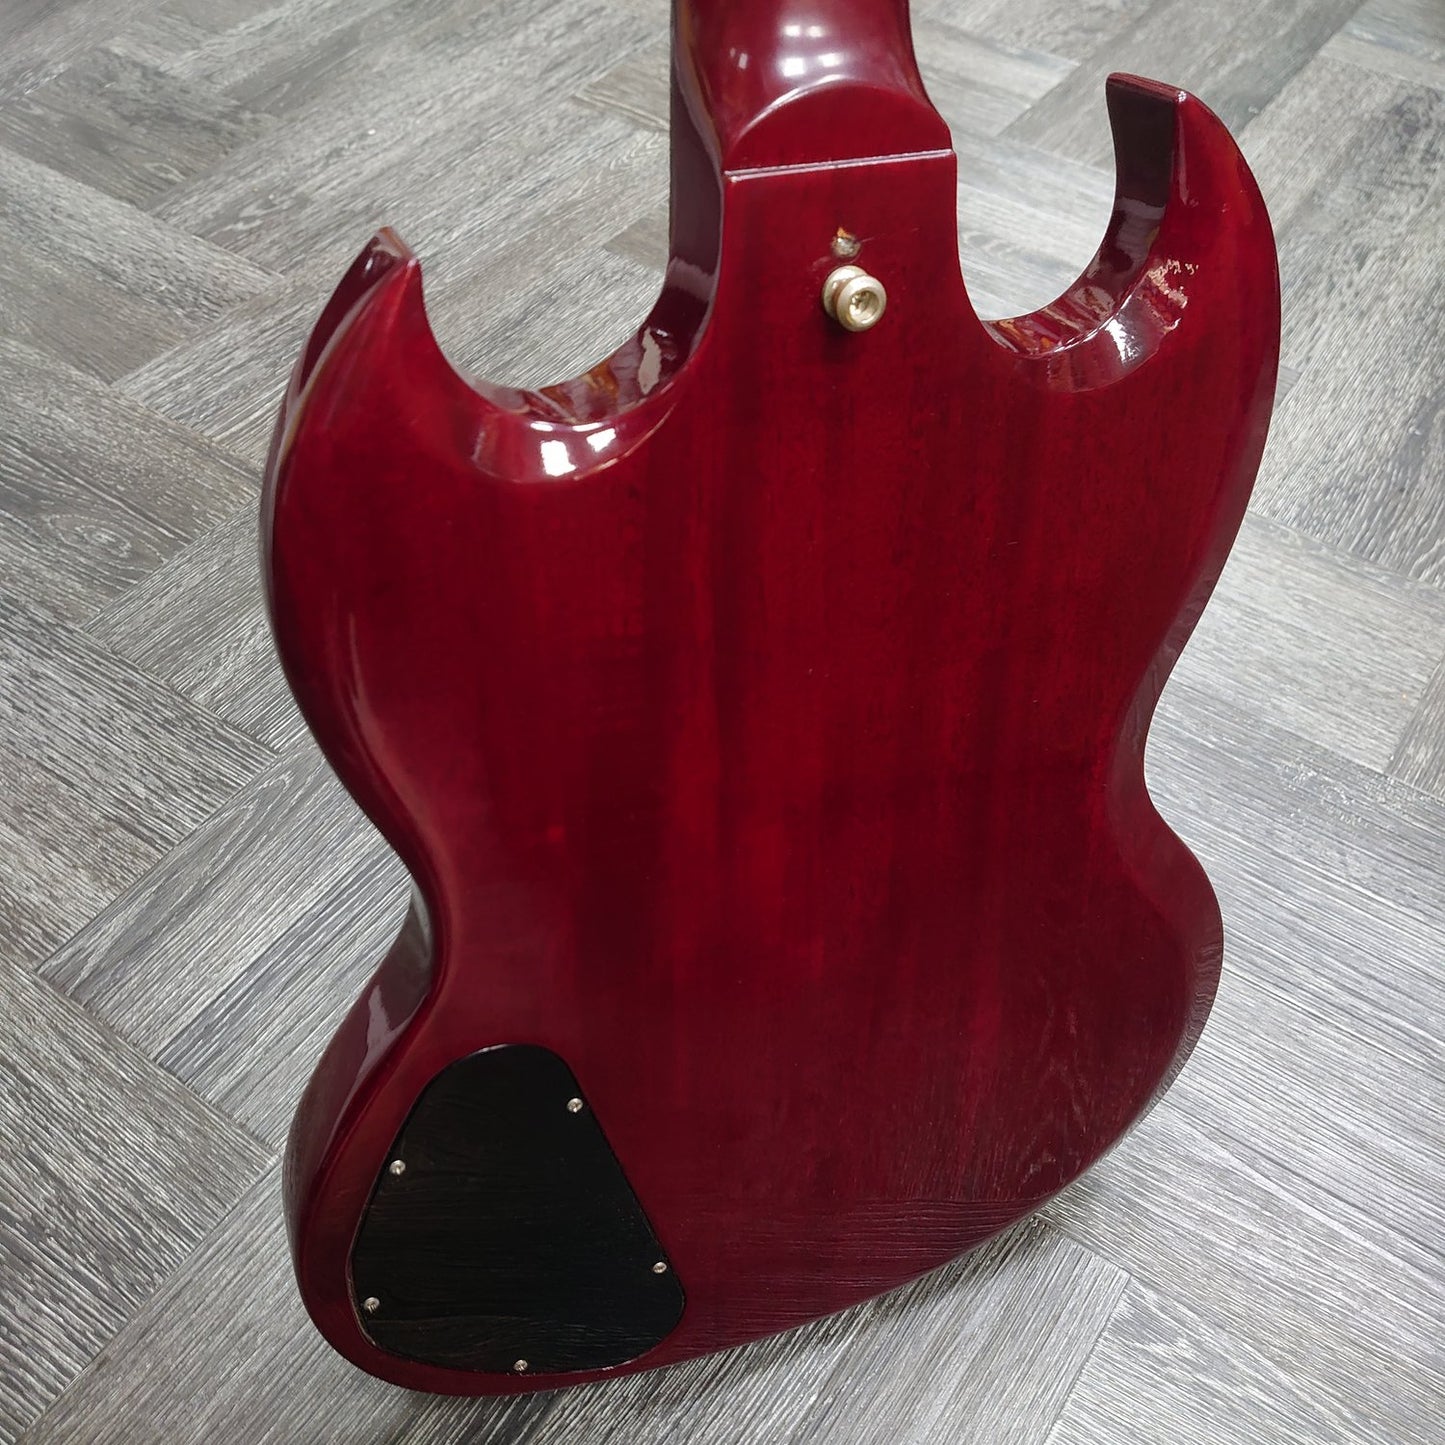 Gibson SG Special ~ Wine Red [2002]